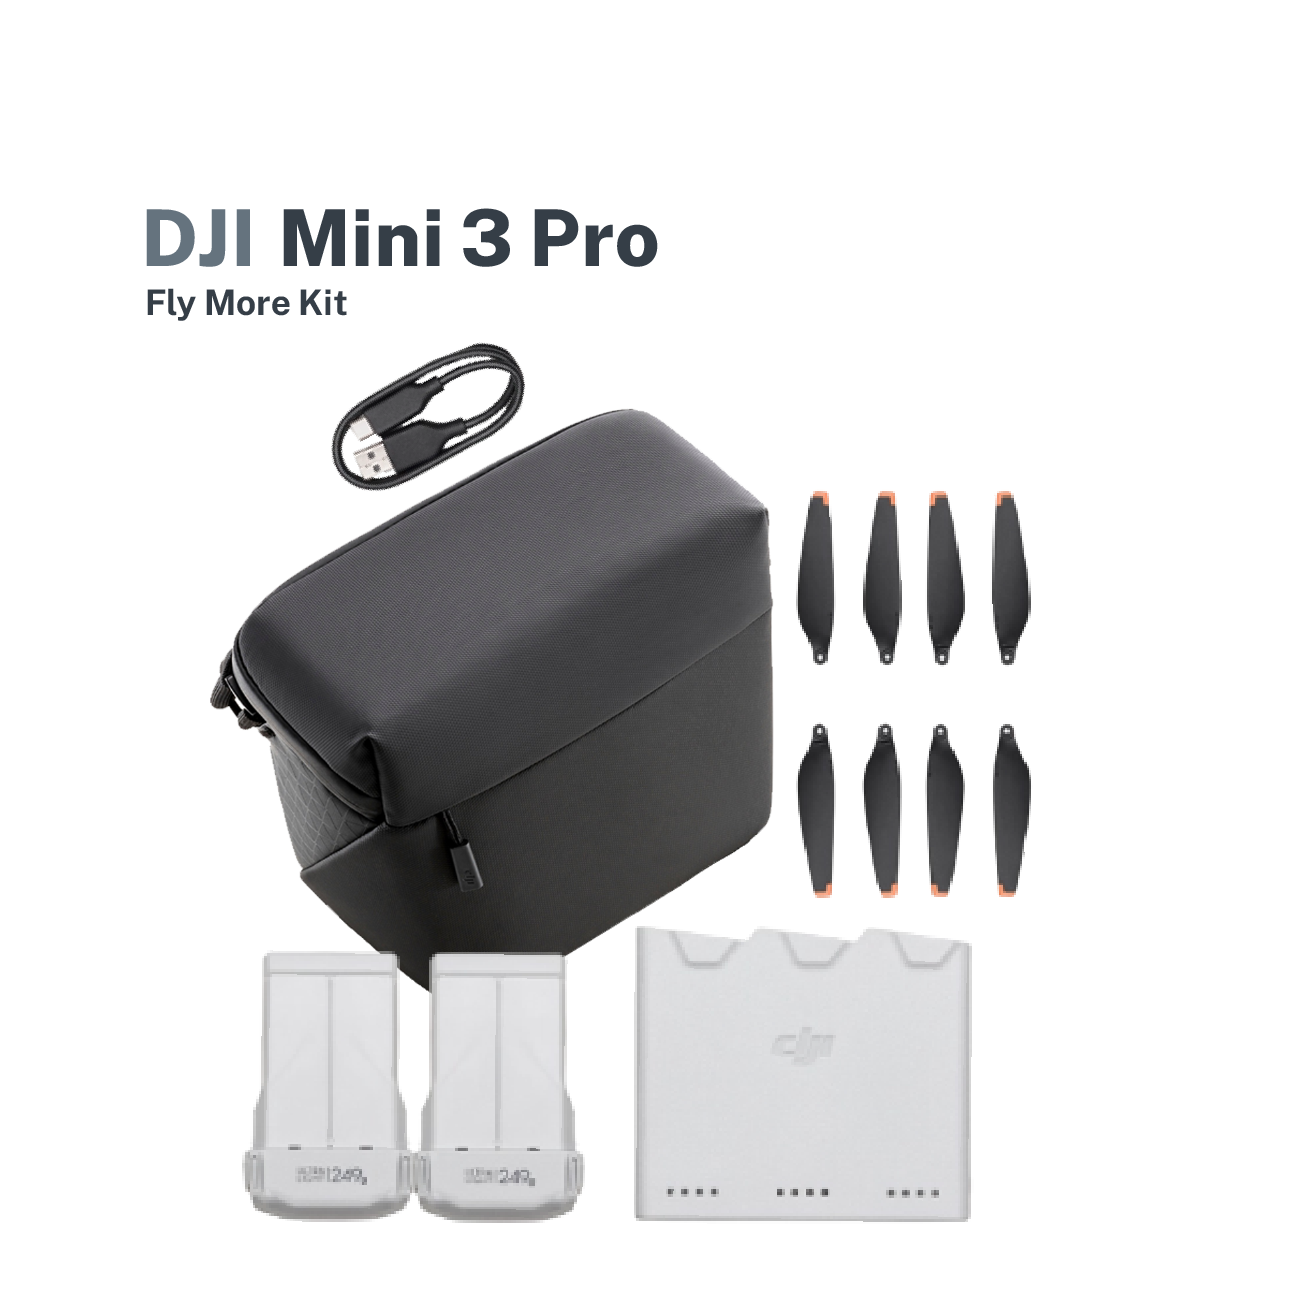 DJI mini 3 Pro Drone - Battery Firmware Update for Fly More Kit 